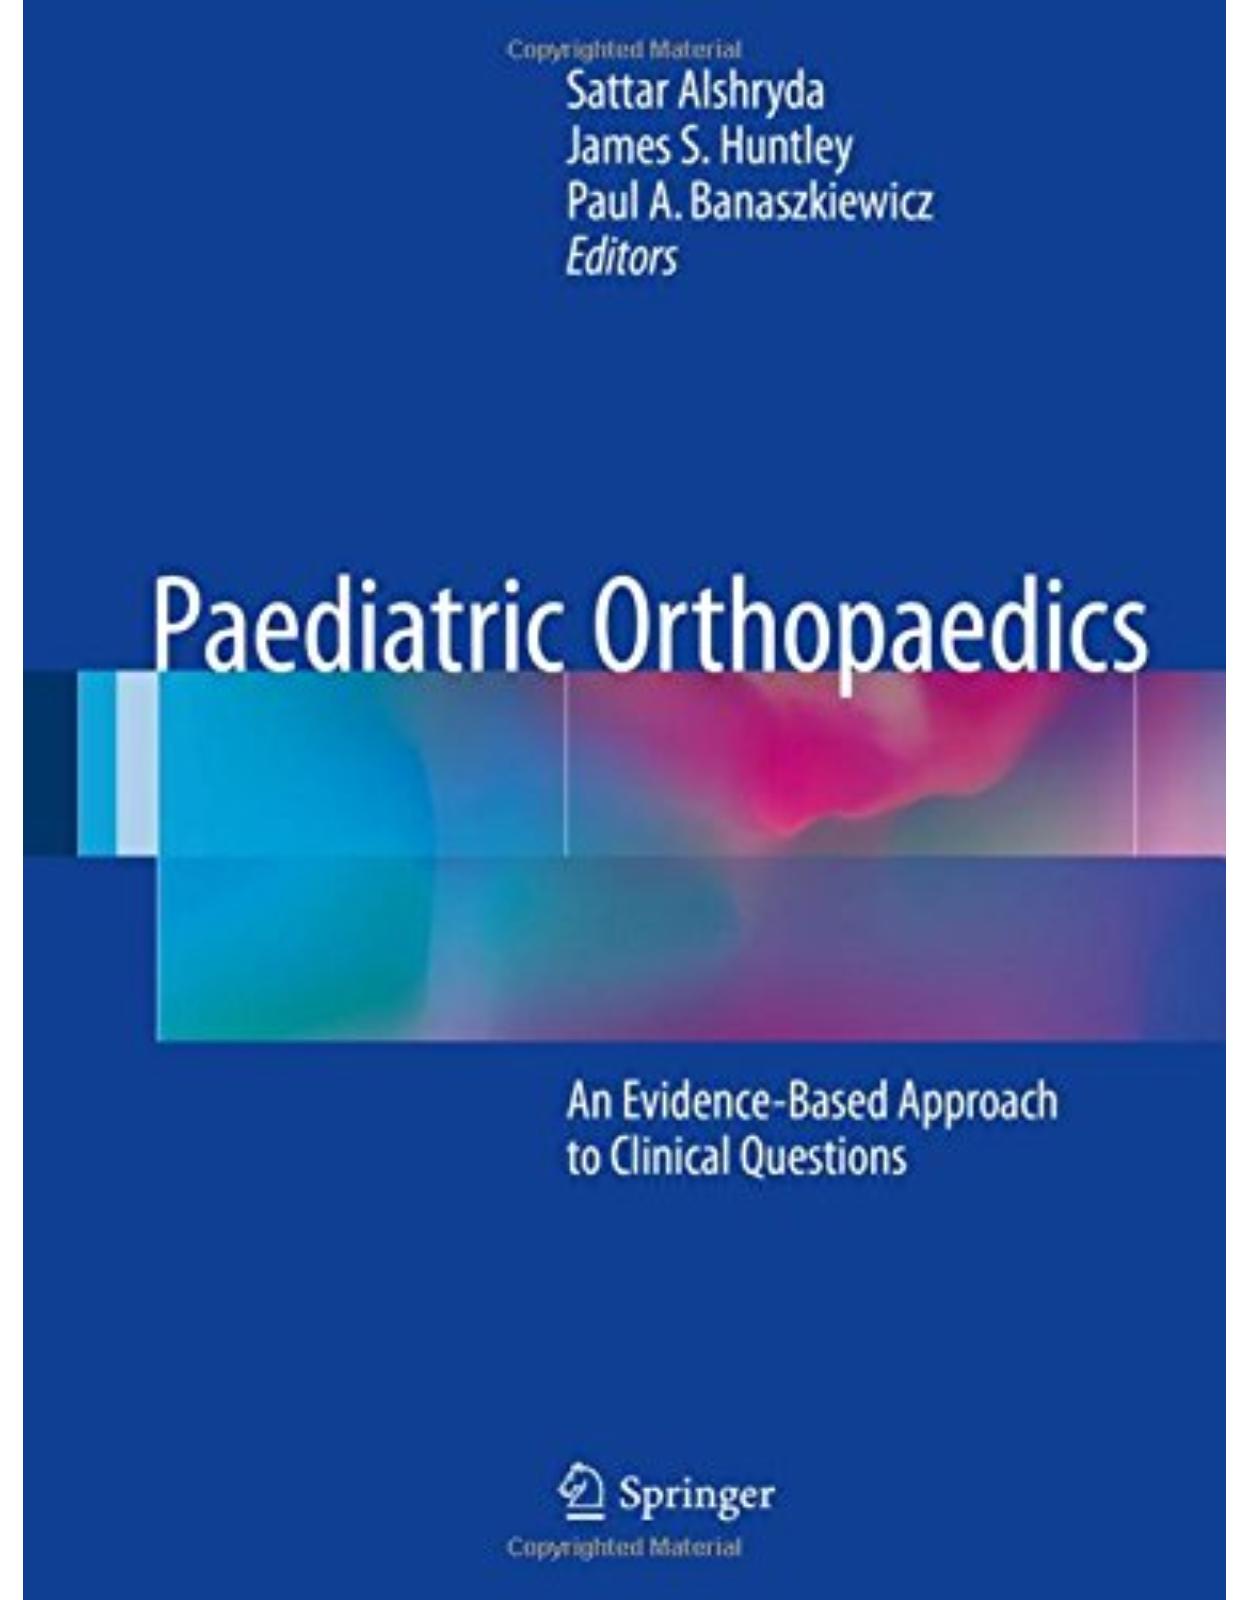 Paediatric Orthopaedics: An Evidence-Based Approach to Clinical Questions